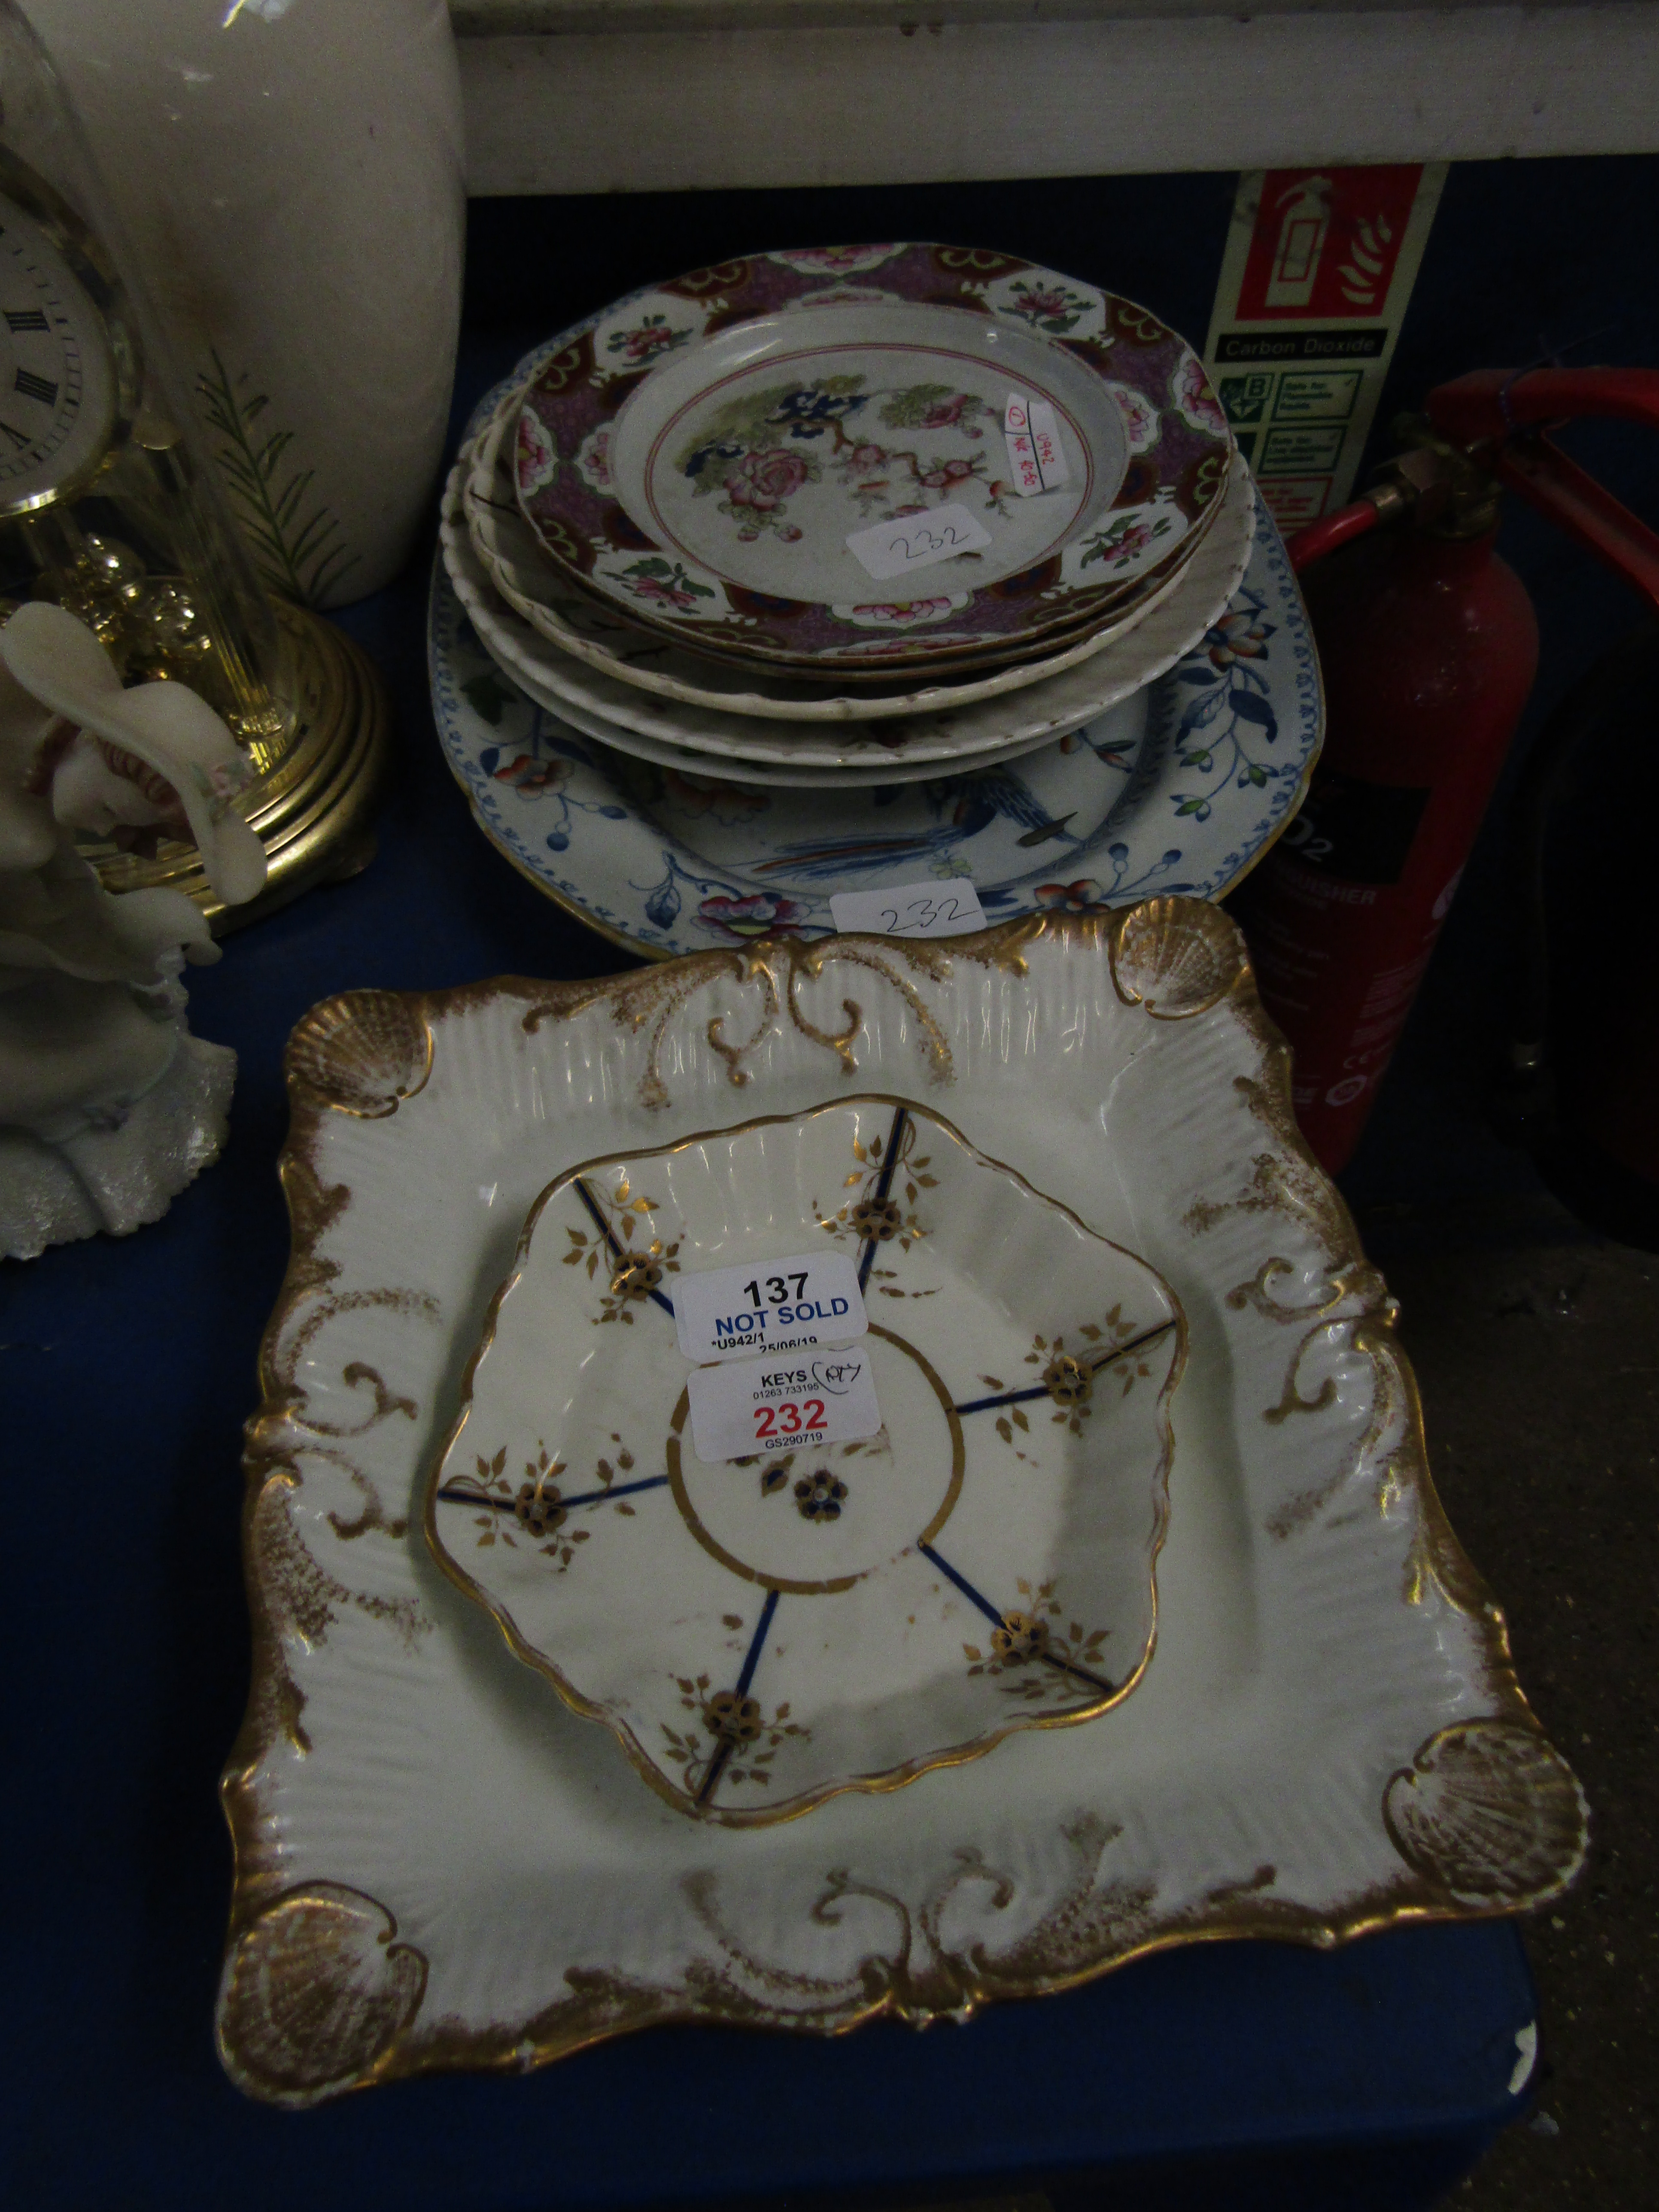 GROUP OF PORCELAIN ITEMS INCLUDING A CAUGHLEY LATE 18TH CENTURY TEA POT AND STAND, VARIOUS PLATES